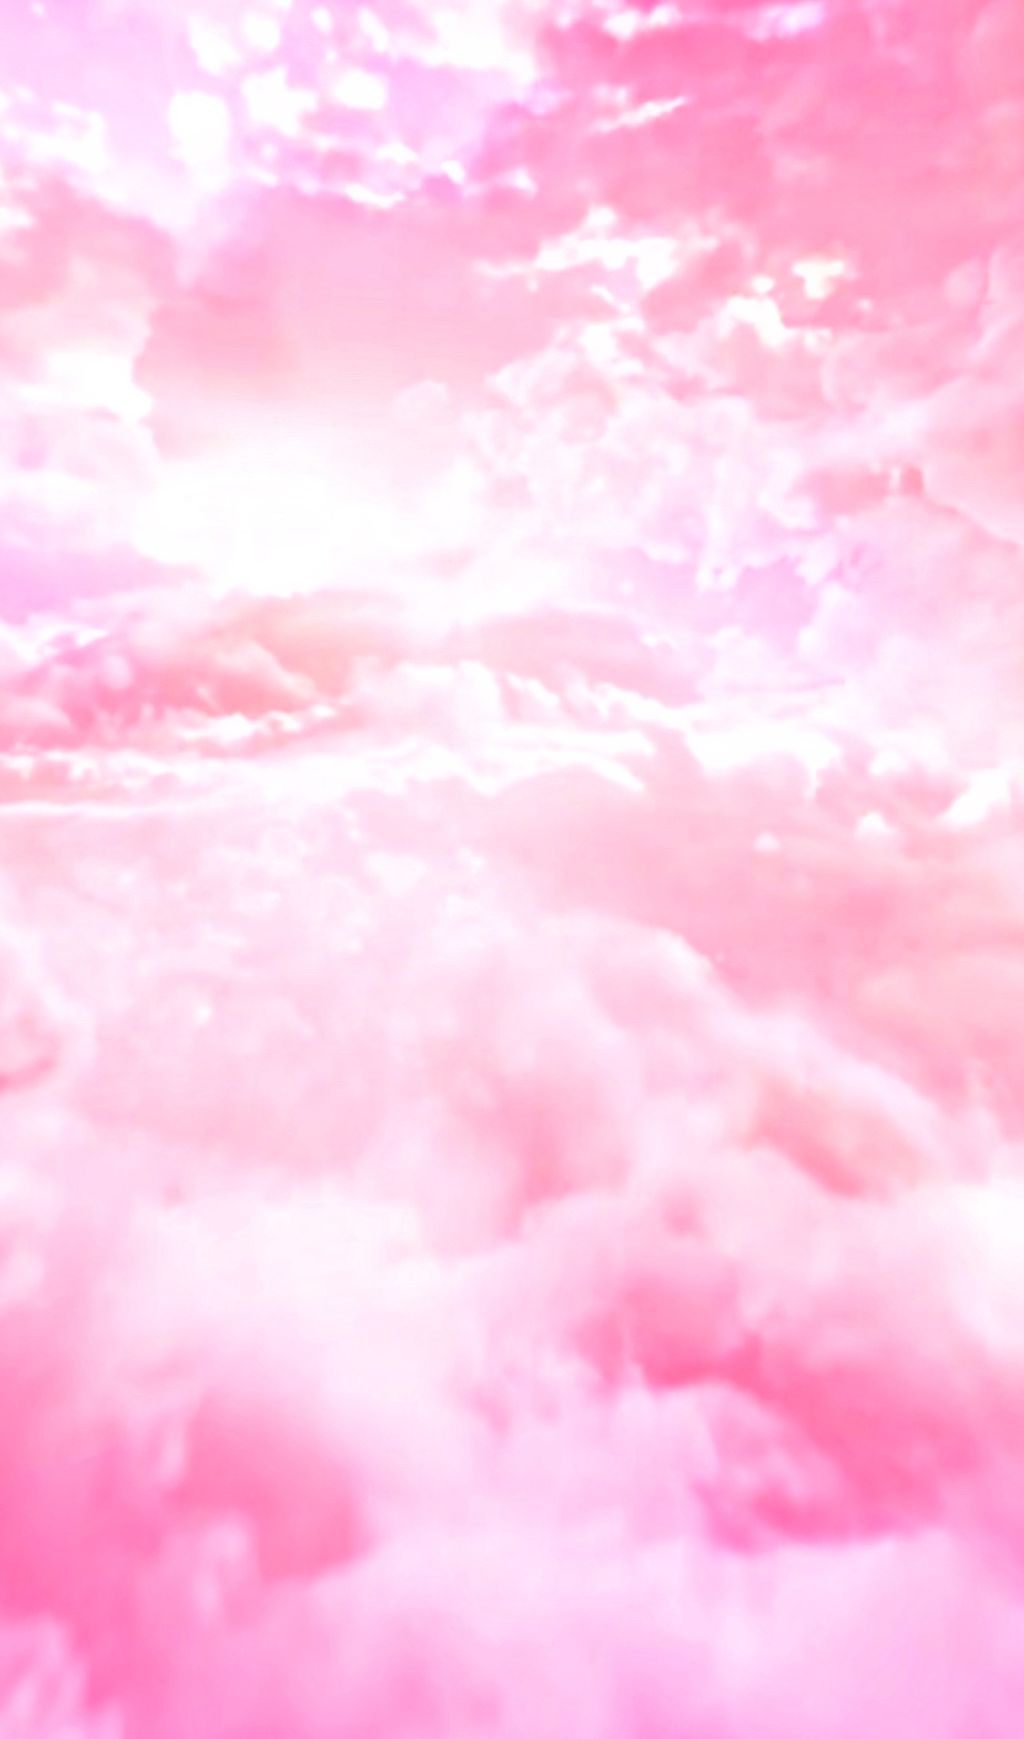 Cloud Image Pink Sky Free Background Hd Wallpaper Backgrounds Download